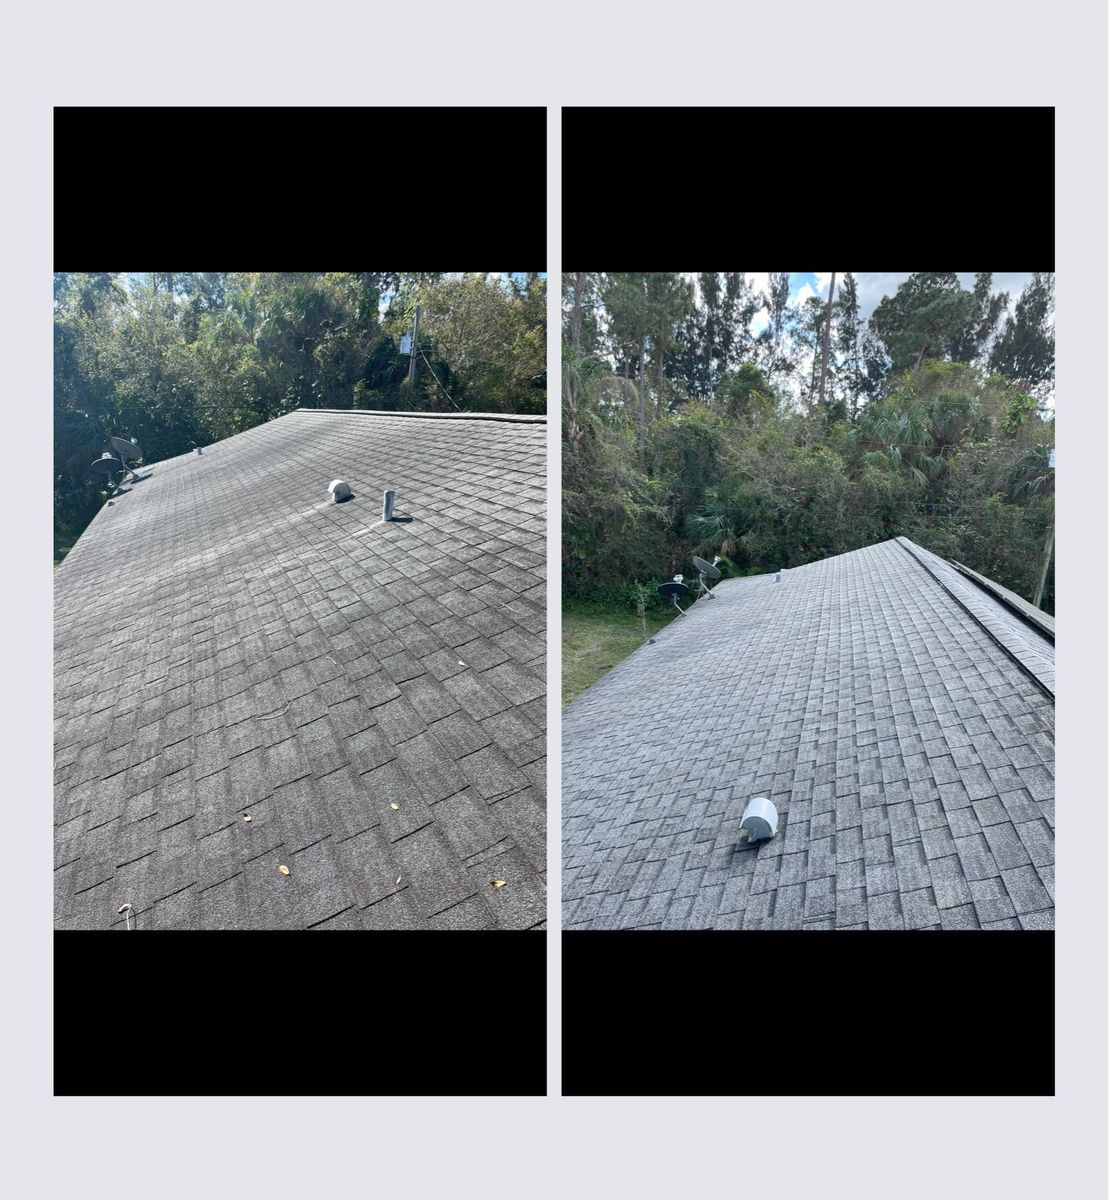 Gutter and Roof Cleaning for C & C Pressure Washing in Port Saint Lucie, FL